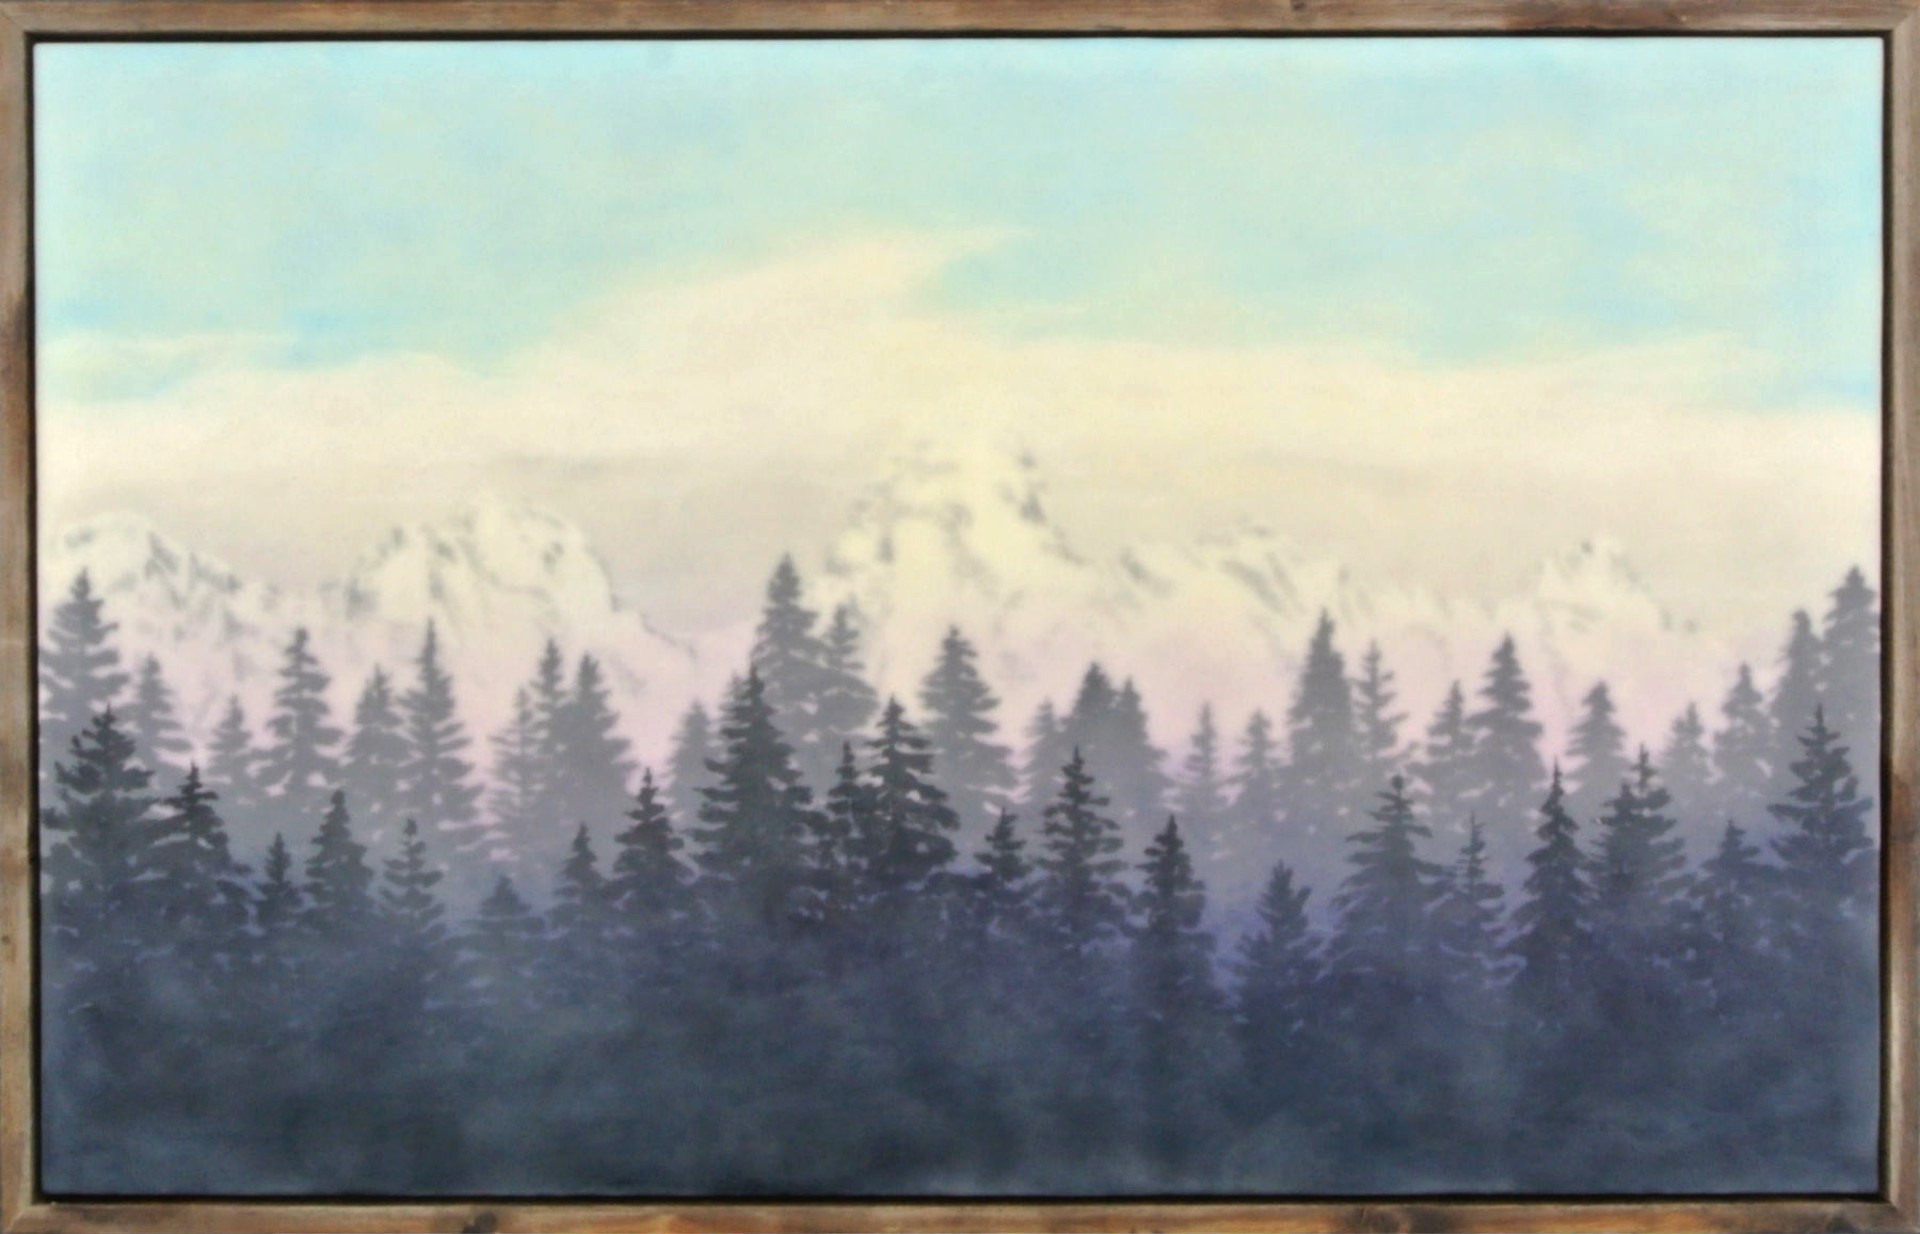 A Beautiful Contemporary Encaustic Painting By Bridgette Meinhold Featuring The Grand Teton Range With Trees In The Foreground, Available At Gallery Wild